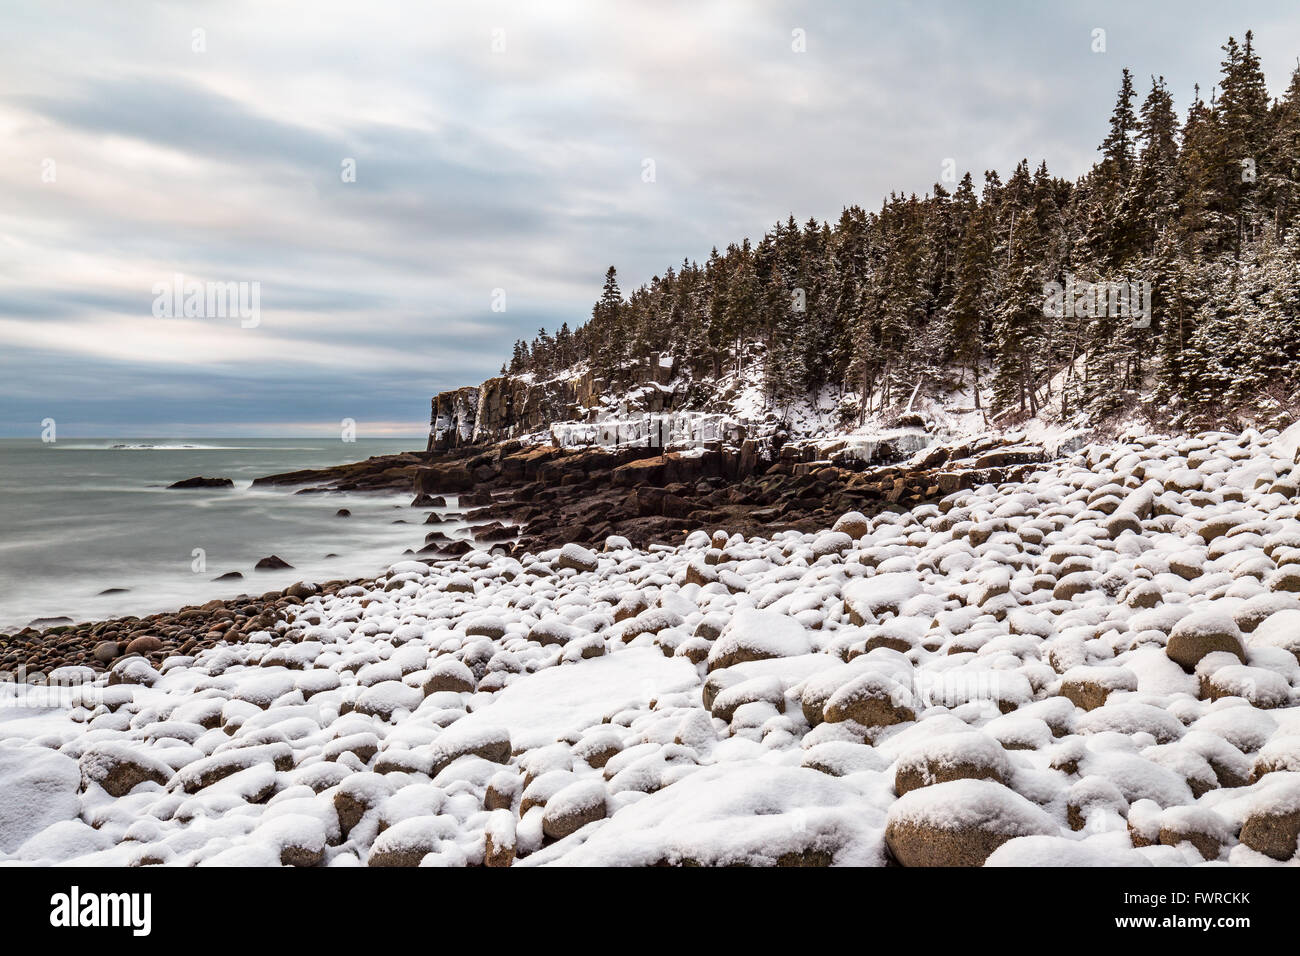 Otter Cliffs seen from a snow covered Boulder Beach in Acadia National Park, Mount Desert Island, Maine. Stock Photo